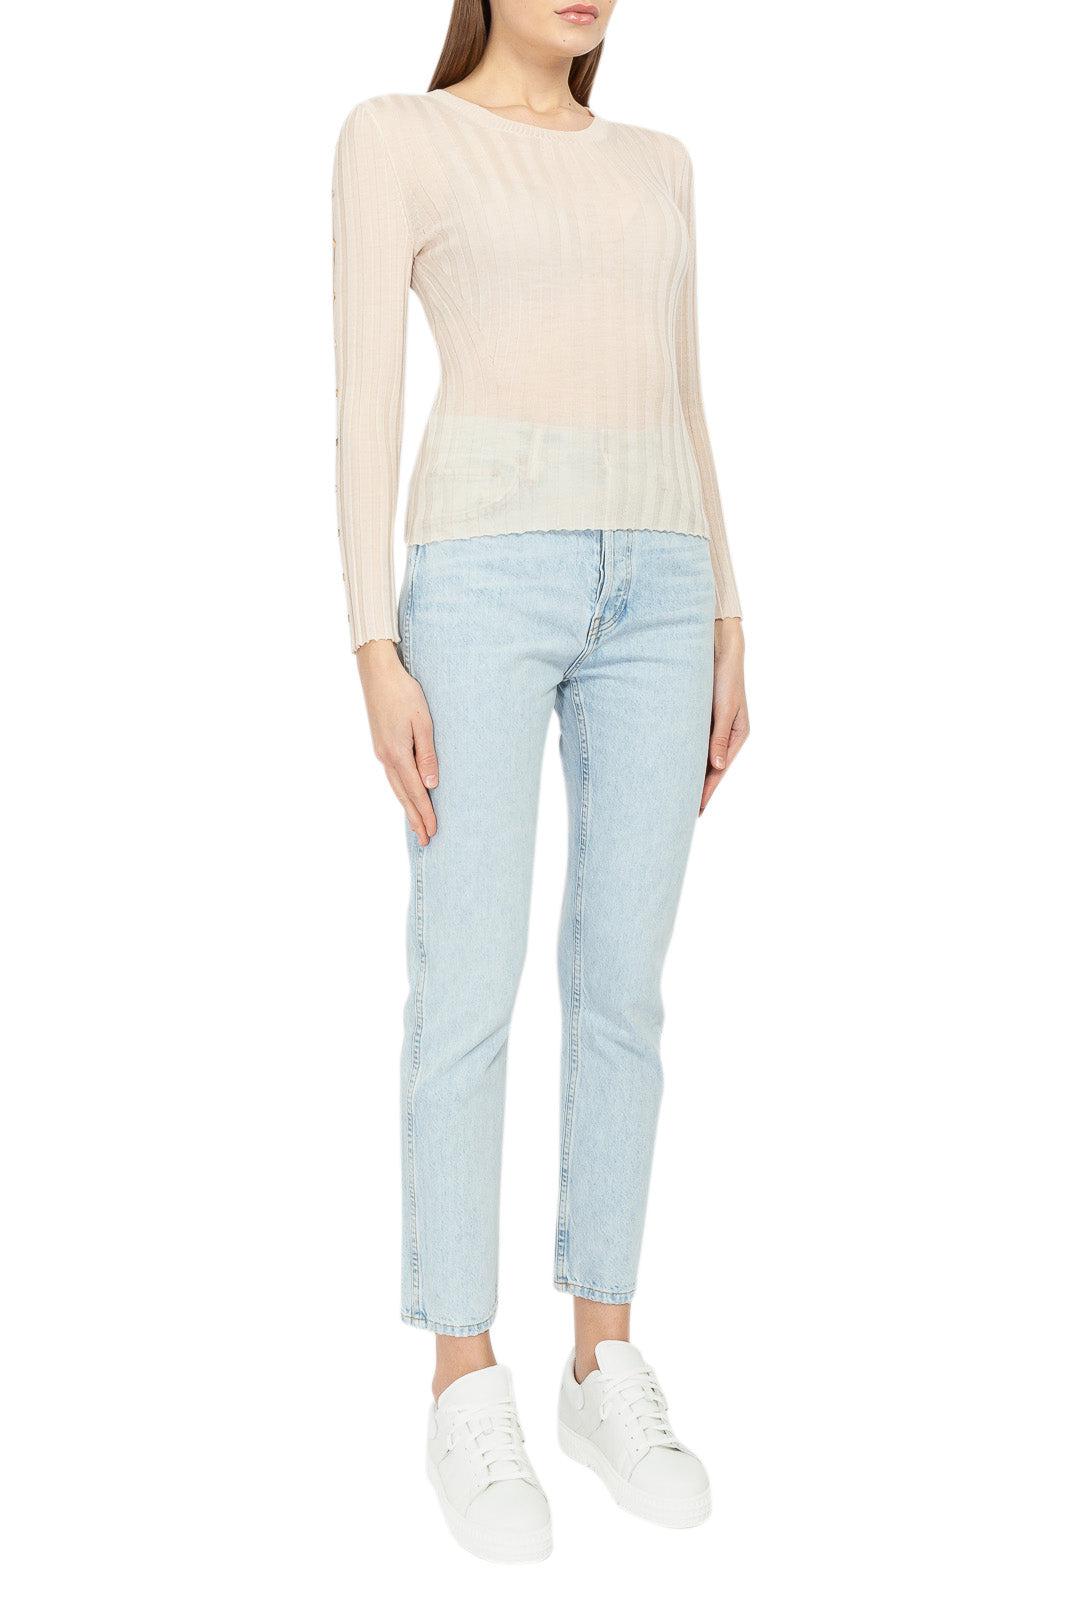 Simkhai-Ribbed sweater with cut-out detail-421-2084-K-dgallerystore